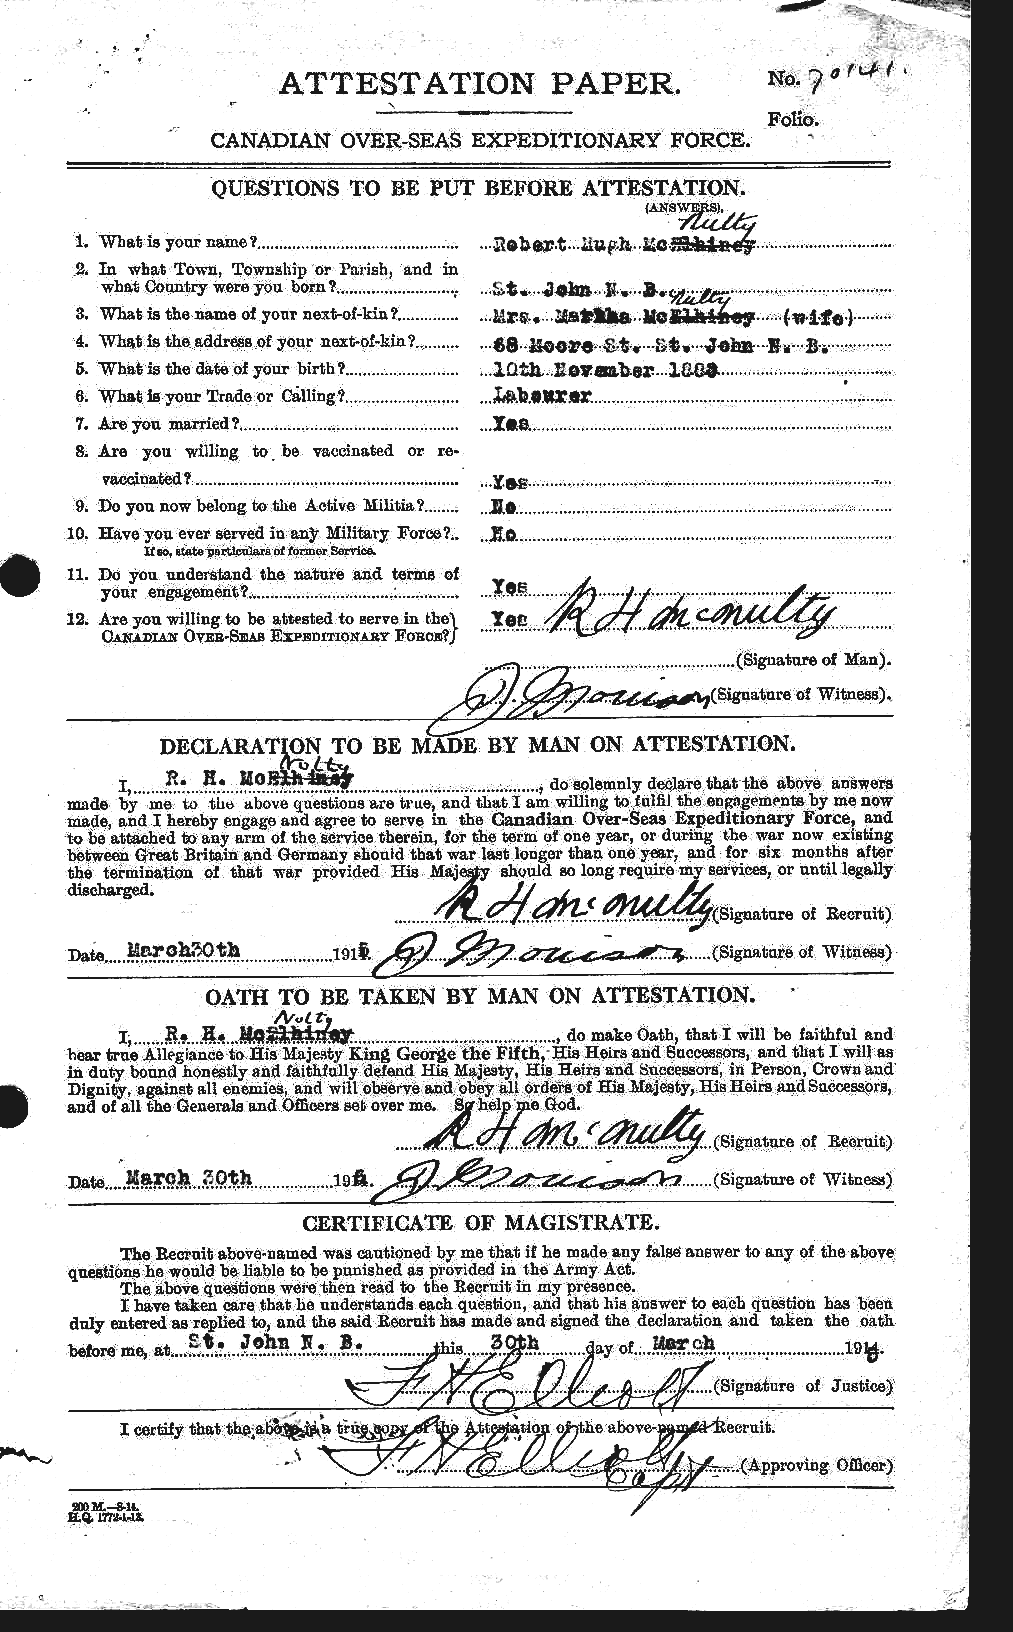 Personnel Records of the First World War - CEF 541953a